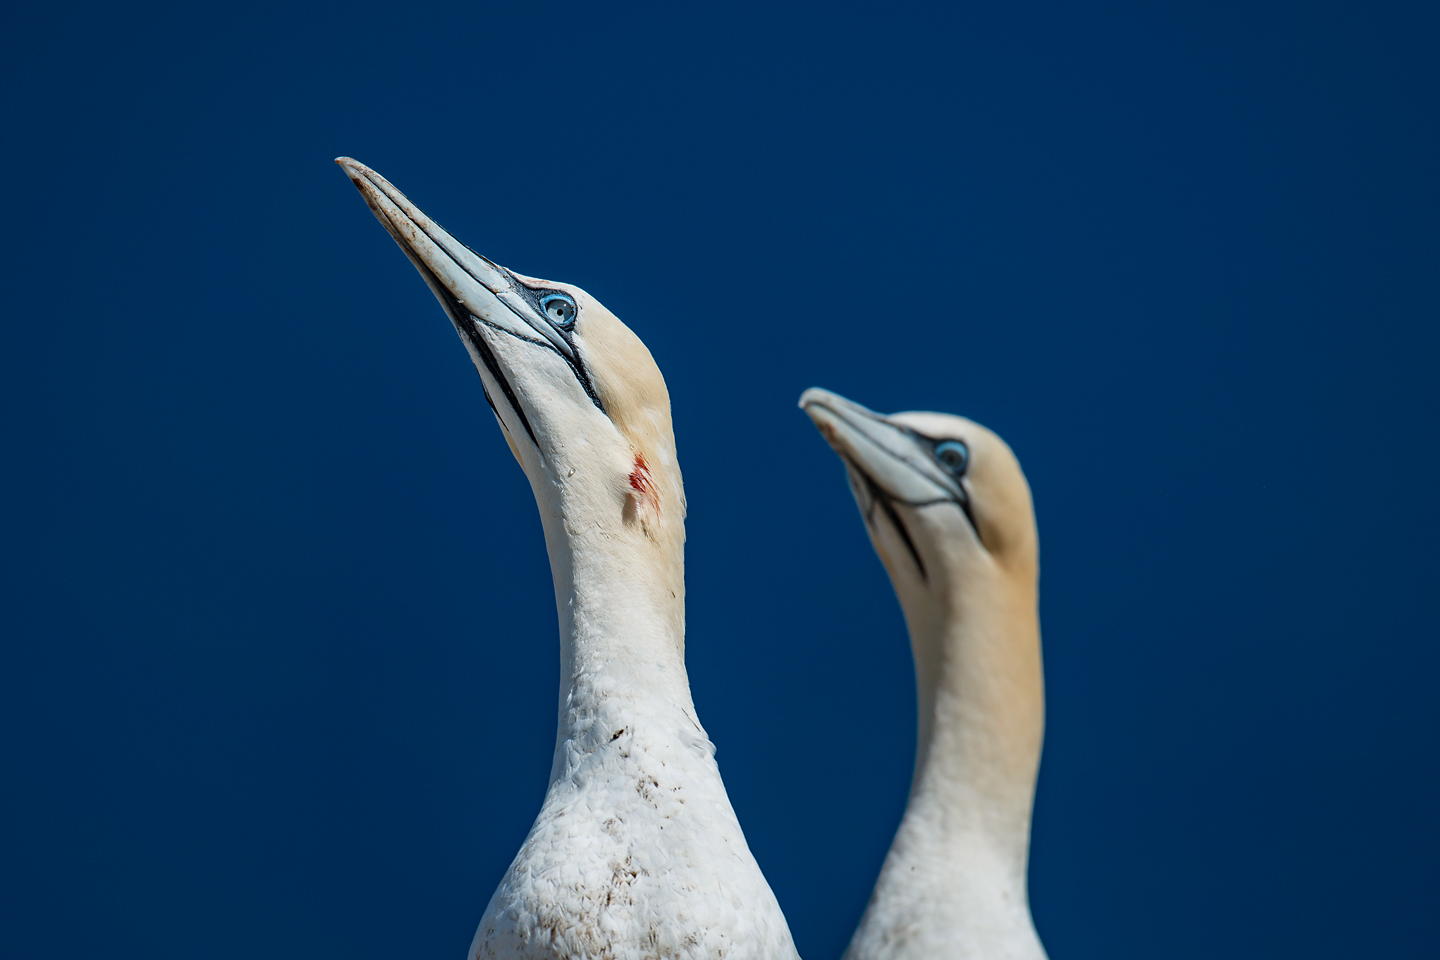  Perfectly streamlined for piercing water at 100 kmph, a northern gannet’s spear-like bill makes a formidable weapon in territorial disputes 